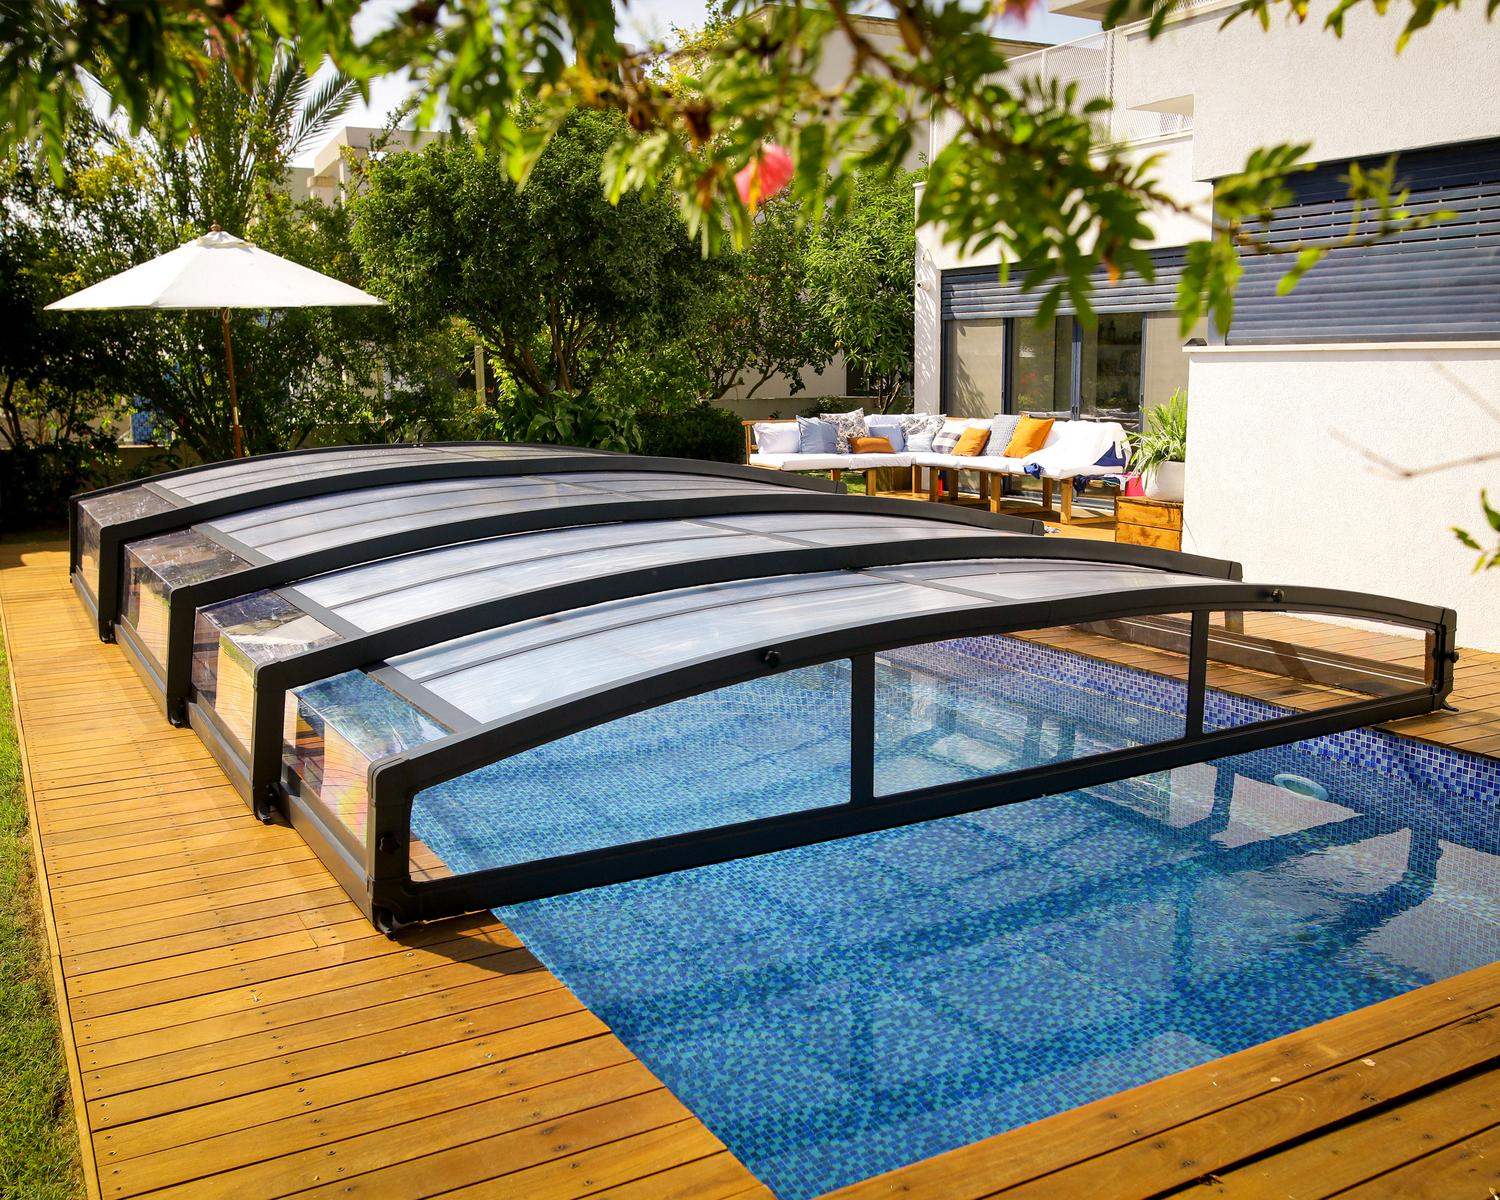 A pool enclosure covers a swimming pool at home